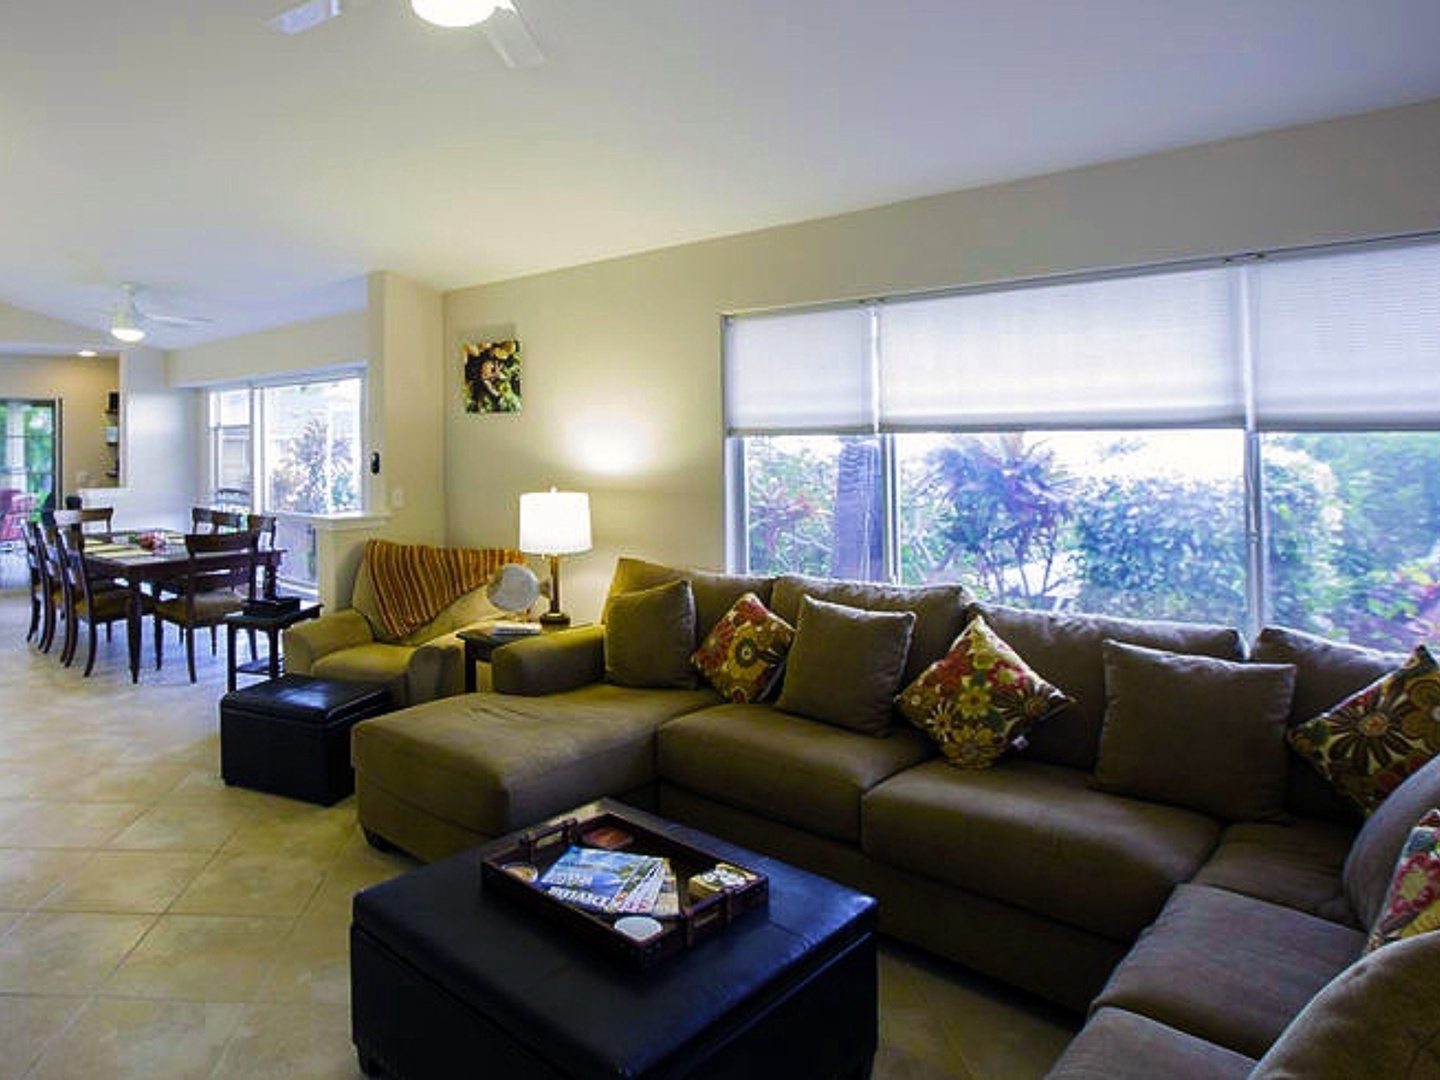 Kailua Kona Vacation Rentals, Hale Alaula - Ocean View - Cozy up on the couch and relax after a day of adventure!